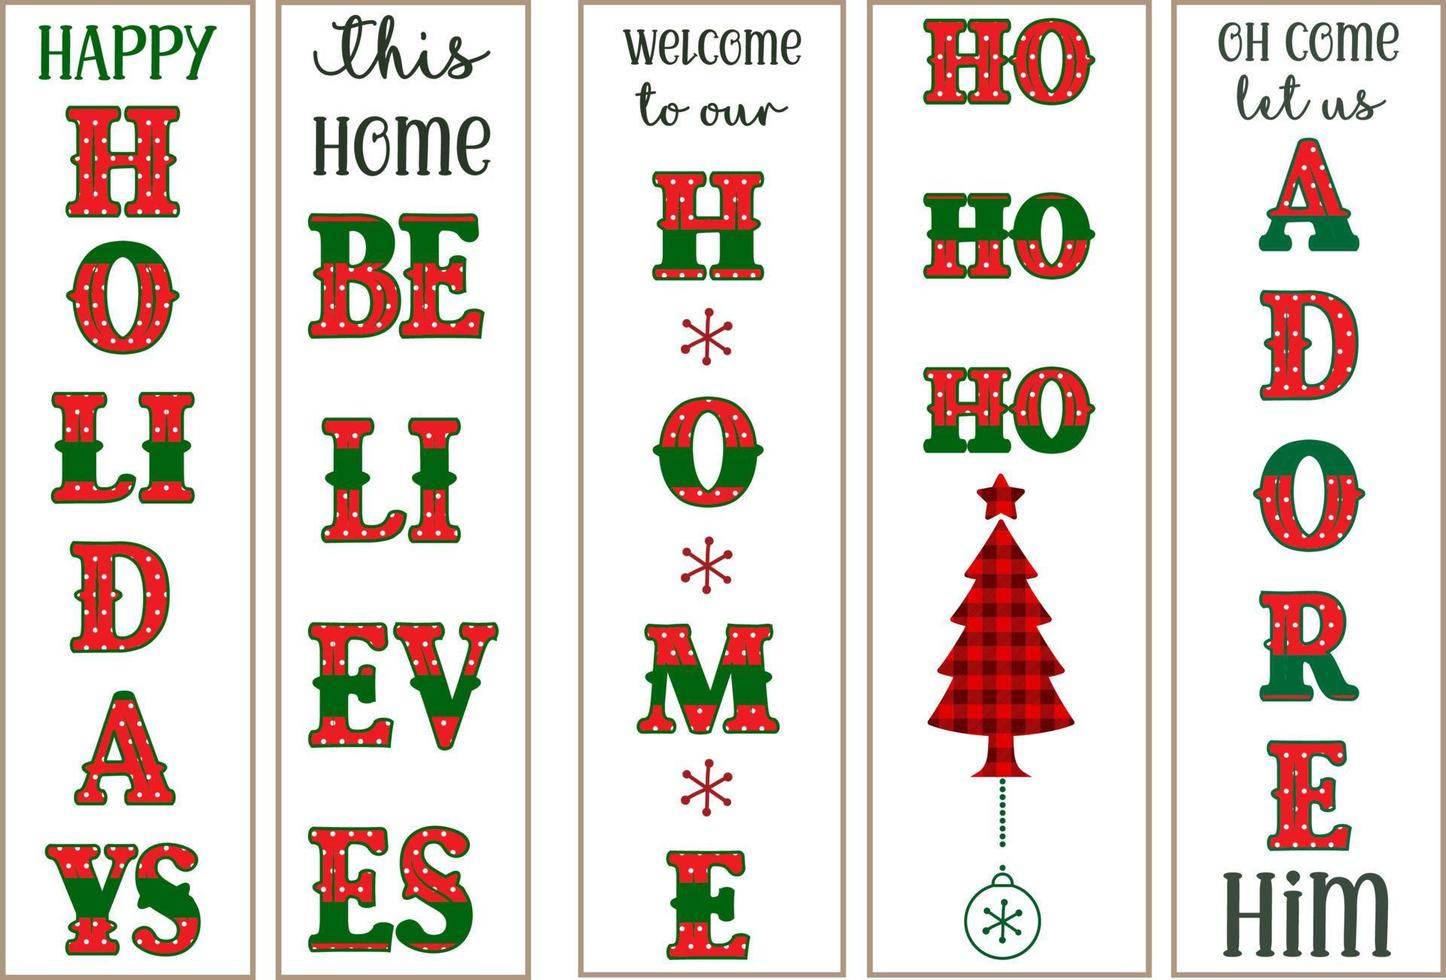 Christmas vertical porch sign bundle for door and background. Happy holidays, this home believes, welcome to our home, ho ho ho, come let us adore him design quote and sayings vector